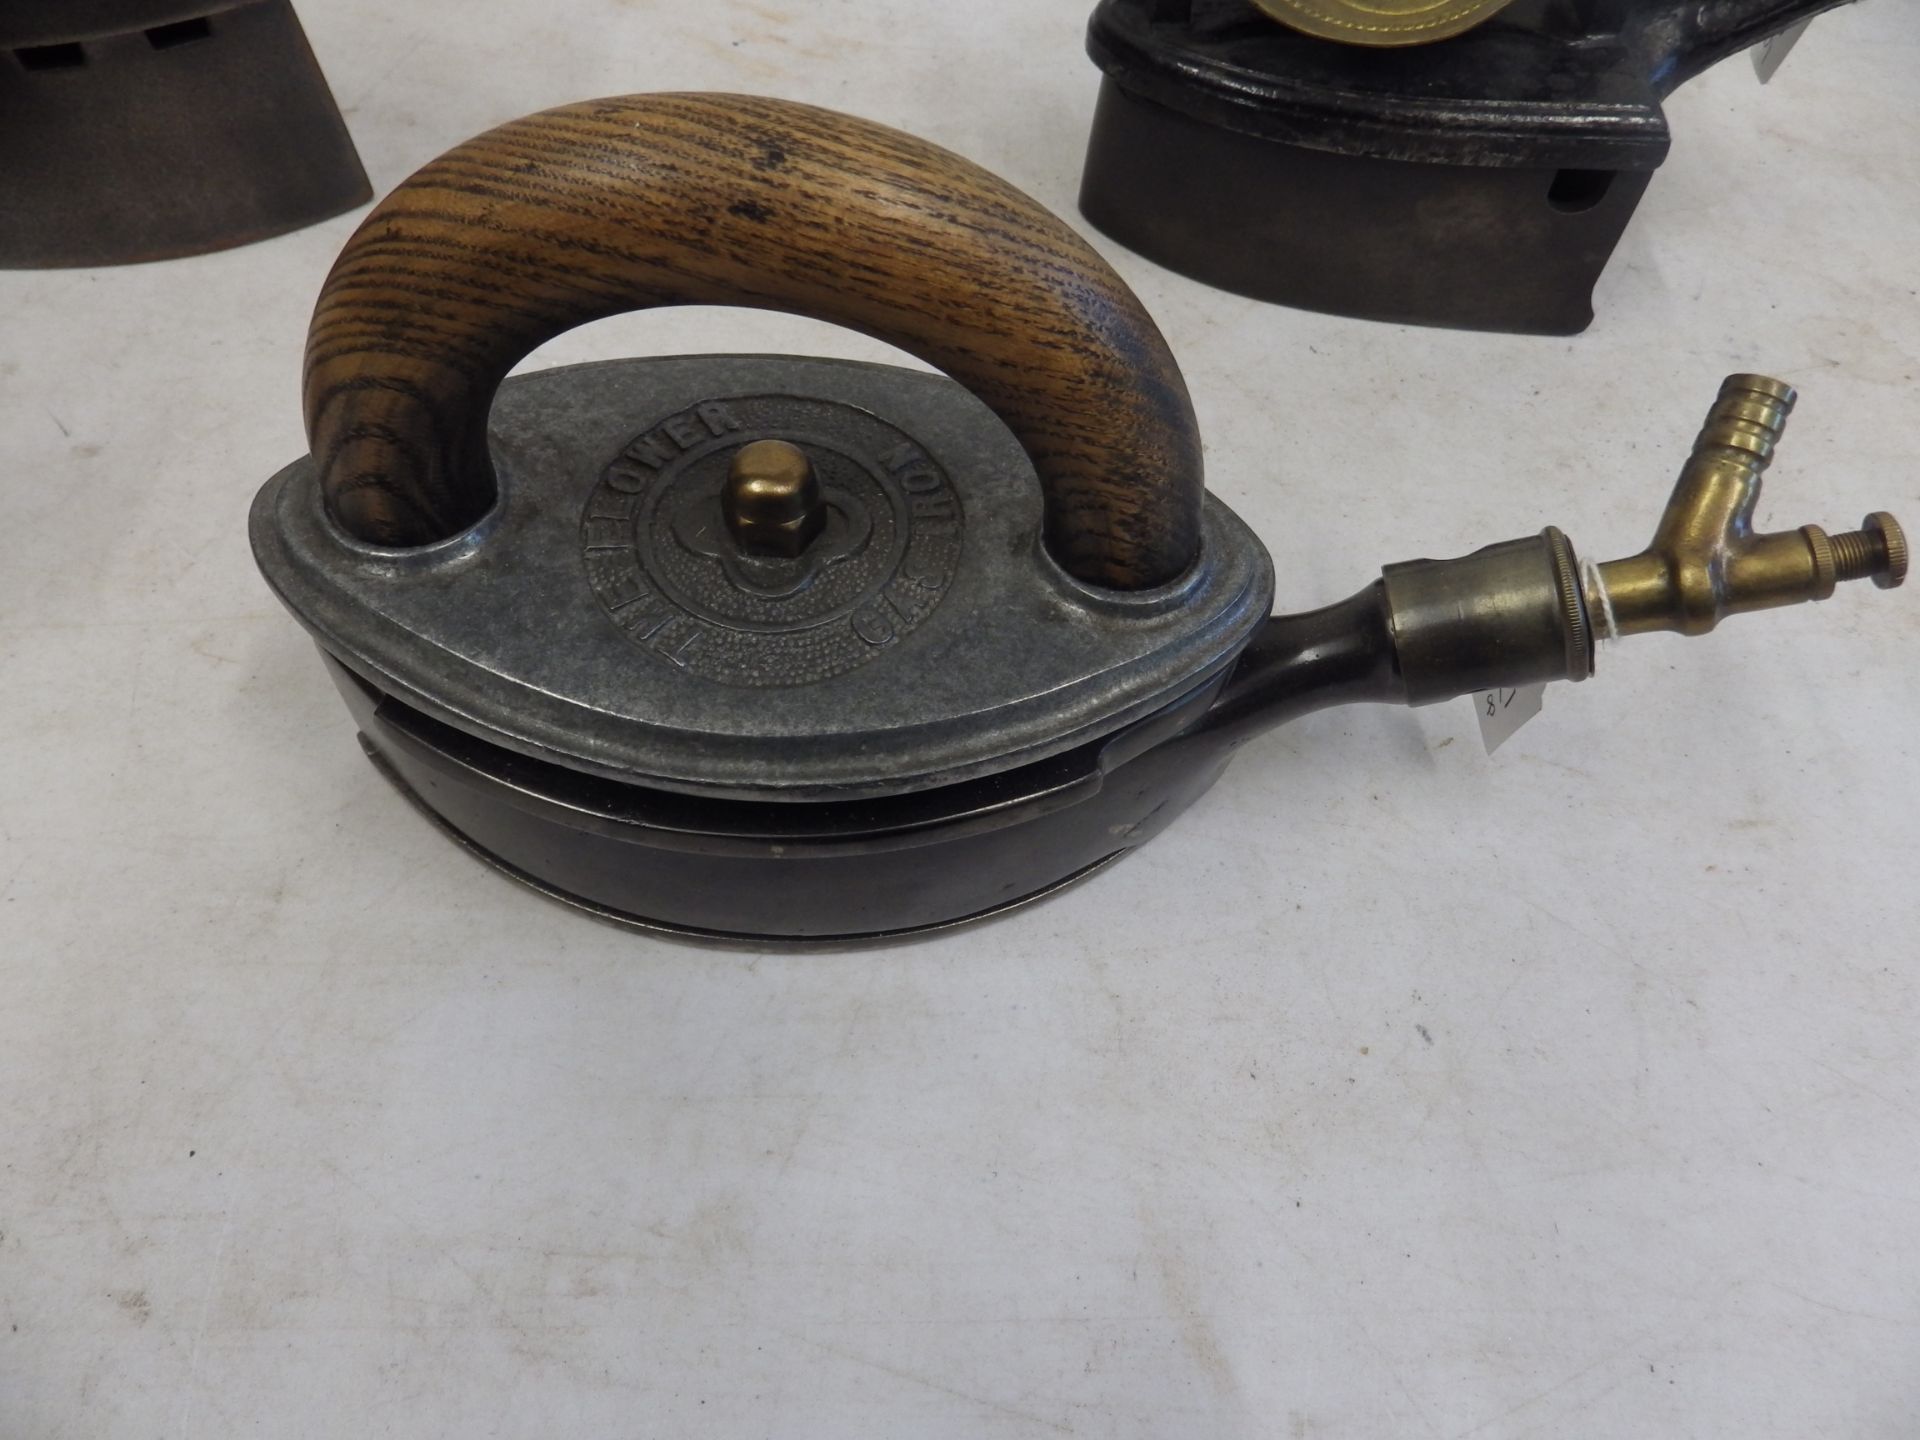 4 assorted gas irons to incl The Flower circa 1920's, Lyng rd 74378, The Premier and Beecrofts J - Image 4 of 5